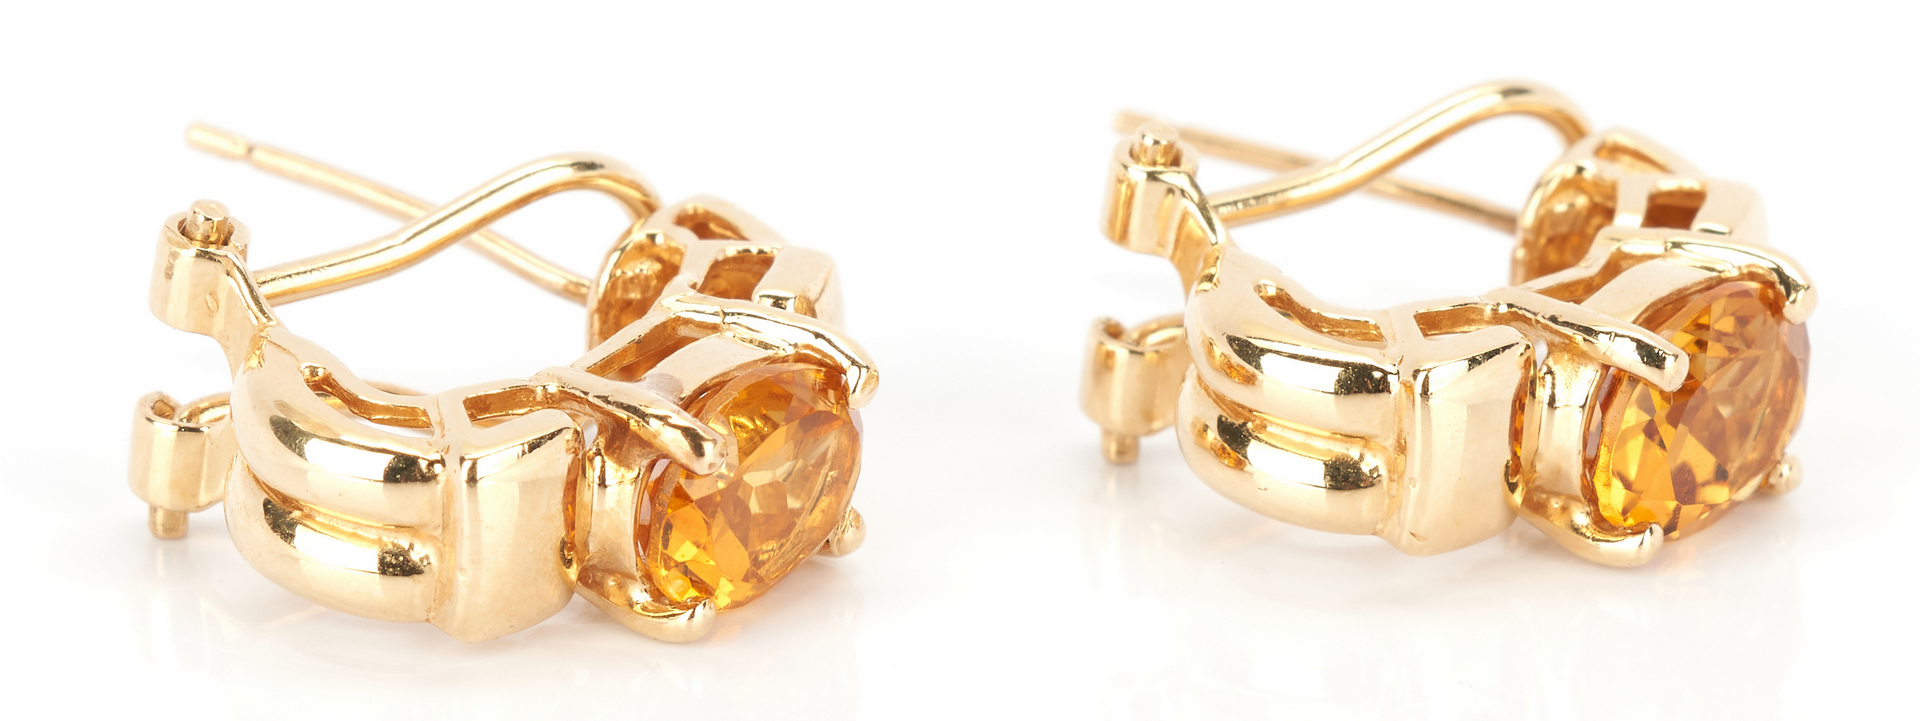 Lot 783: Ladies 14K Gold and Imperial Topaz Earrings